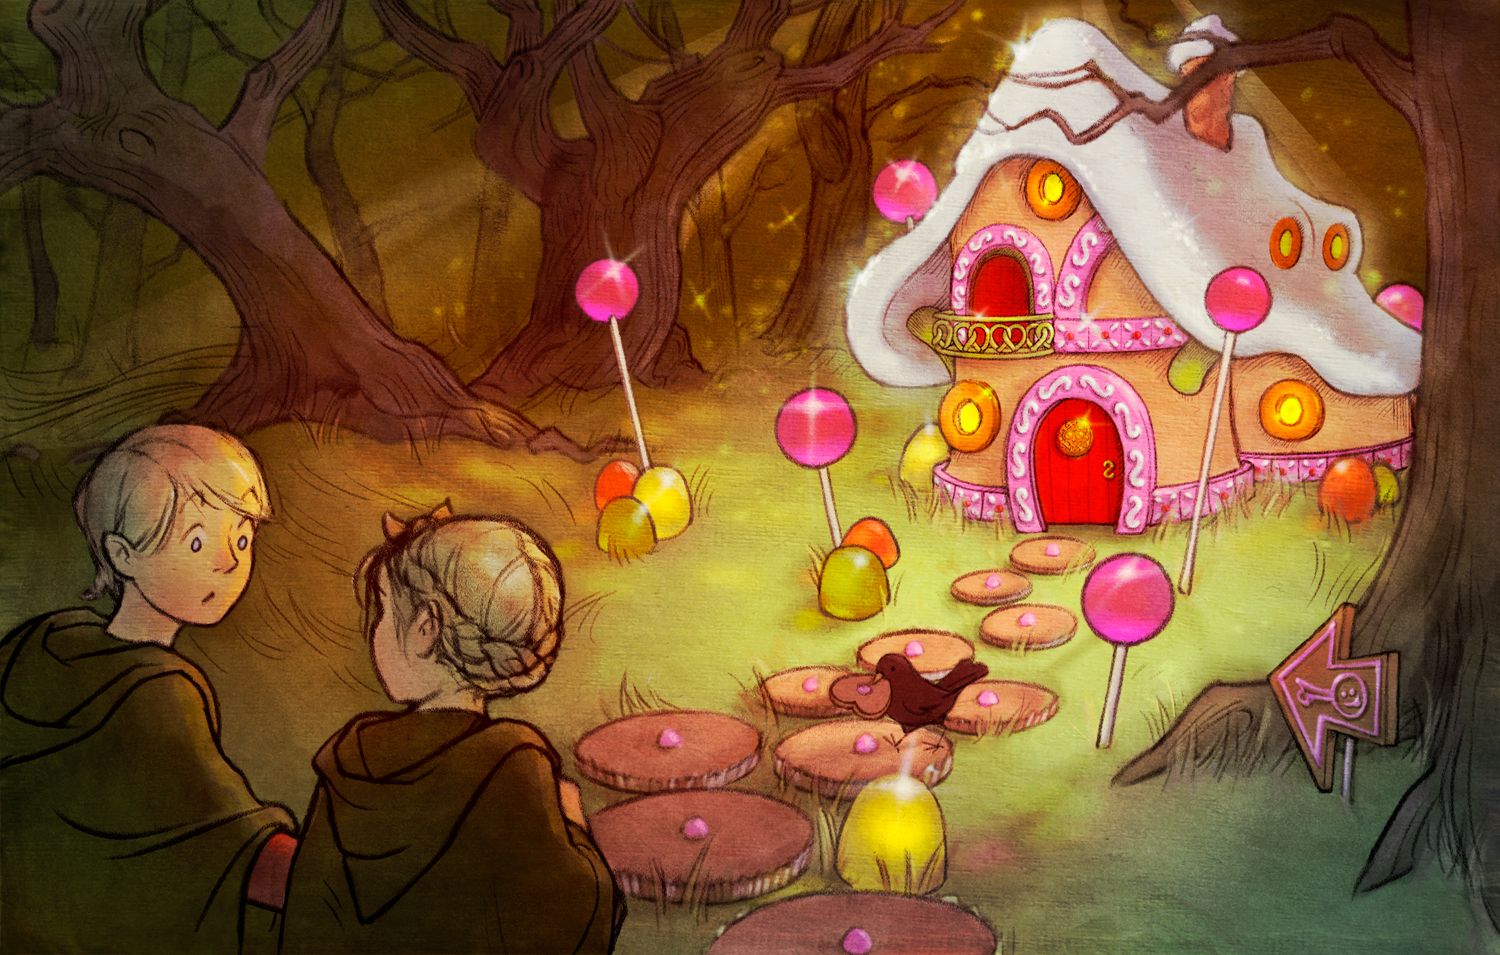 Hansel-and-Gretel-candy-house-shiny-ojects-medieval-gothic-no-text.jpg